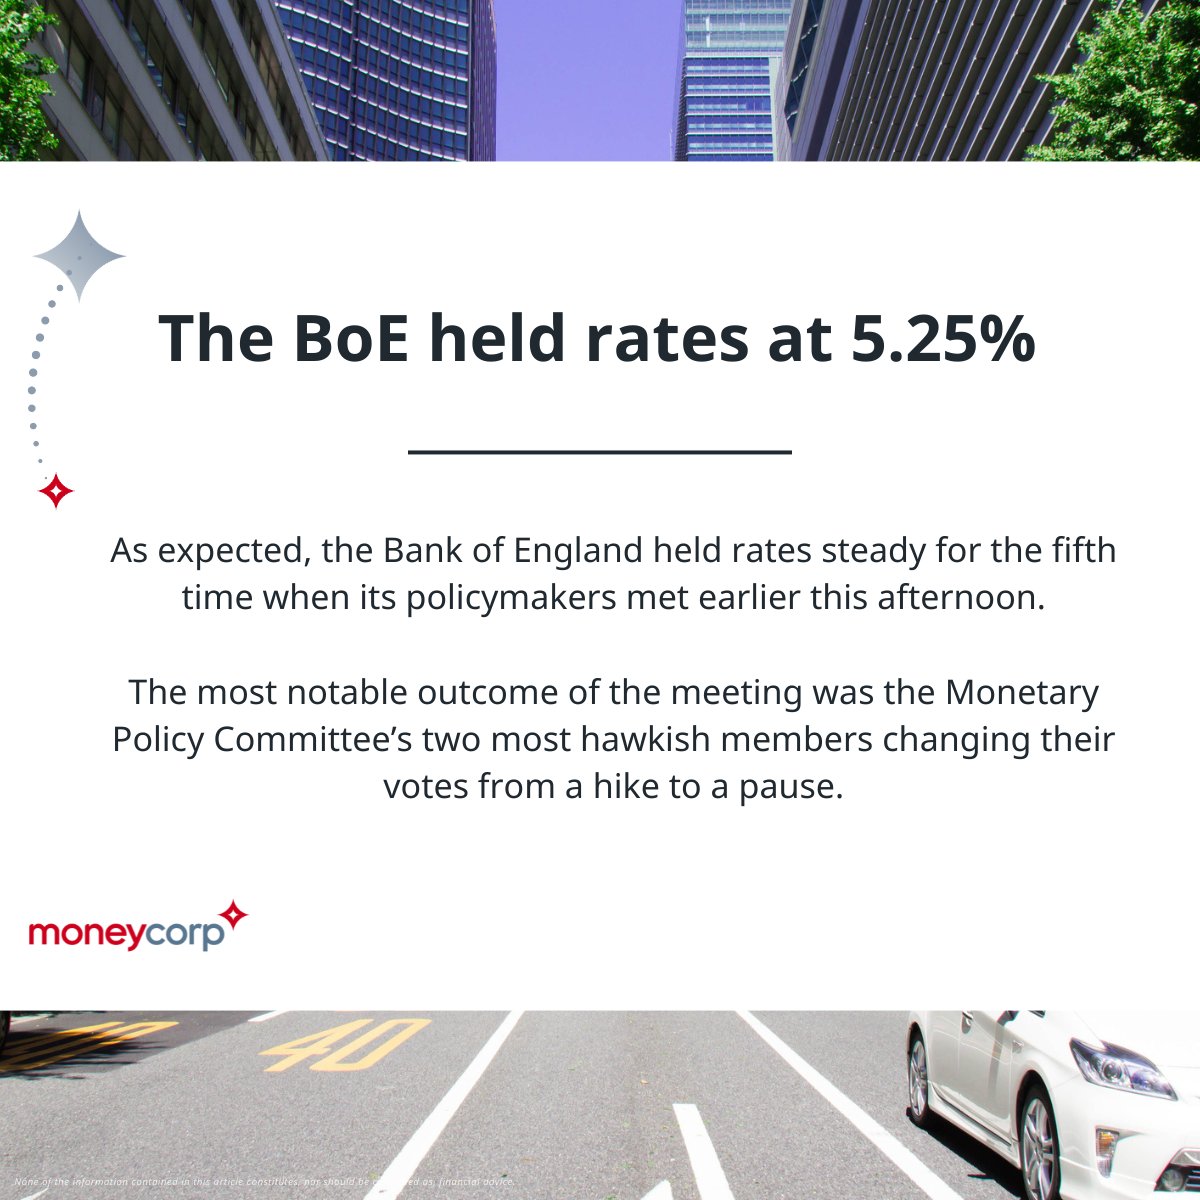 Here's what happened at the latest Federal Reserve and Bank of England meetings. Sign up to our marketing emails to stay updated with market movements: m.moneycorp.com/32mPaMu #FederalReserve #BankofEngland #InterestRates